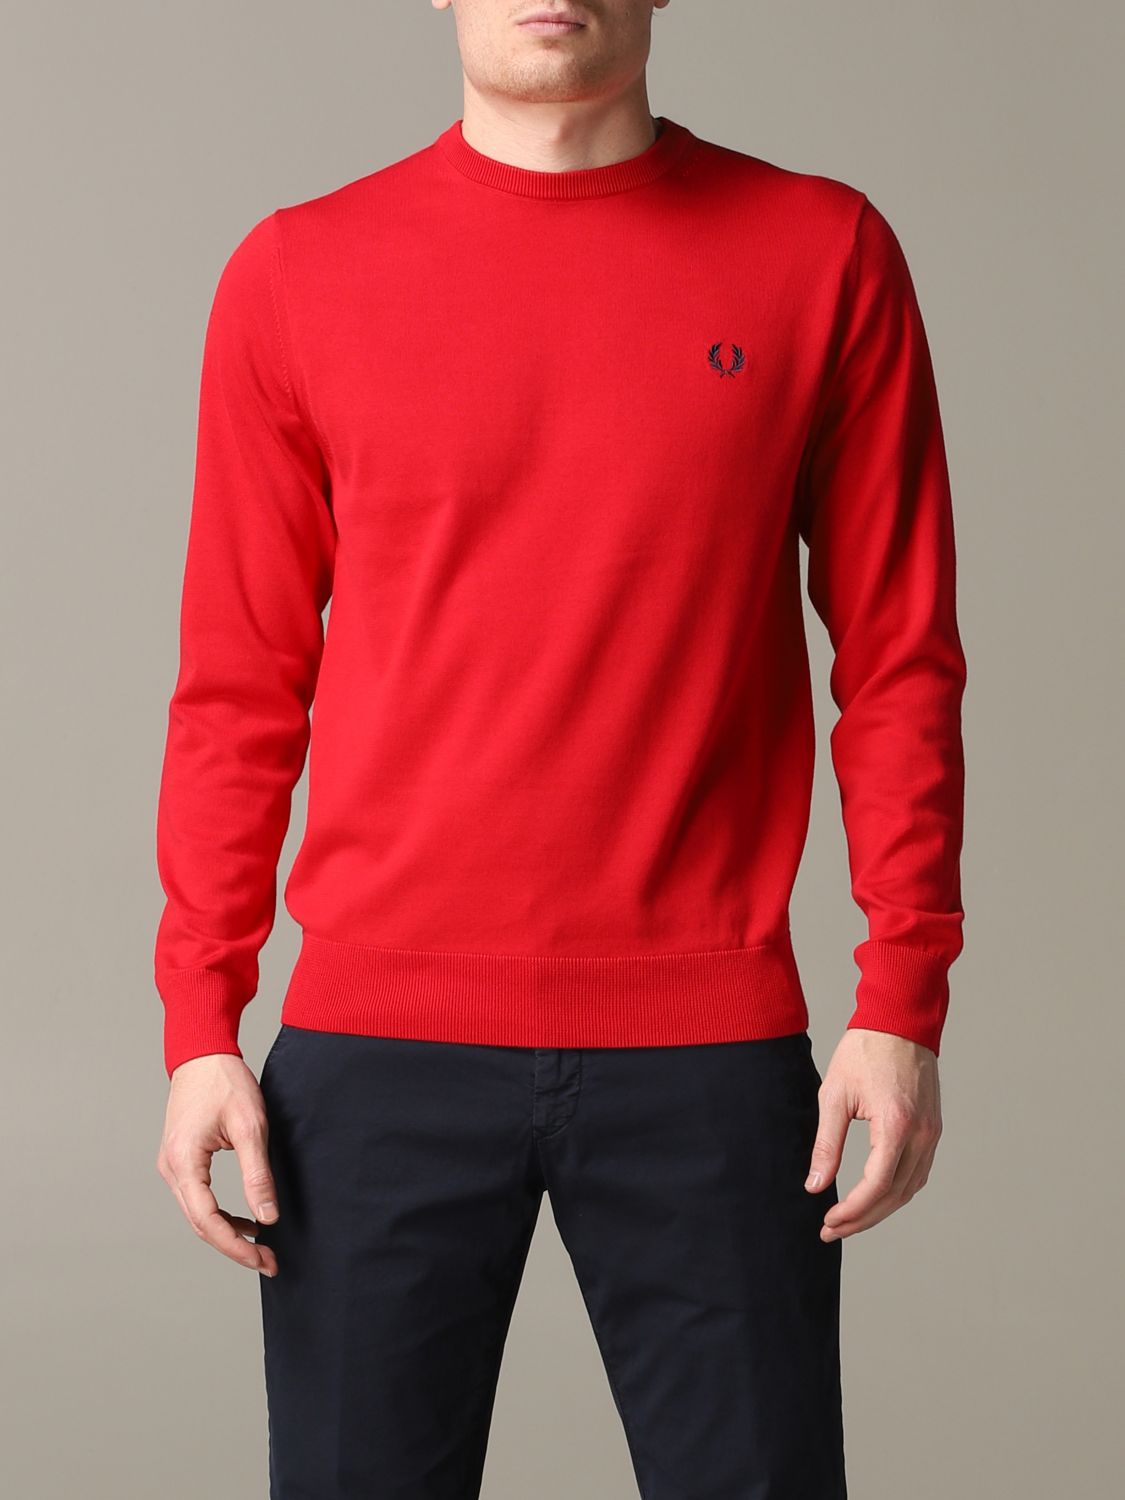 Fred Perry Outlet: Sweater men | Sweater Fred Perry Men Red | Sweater ...